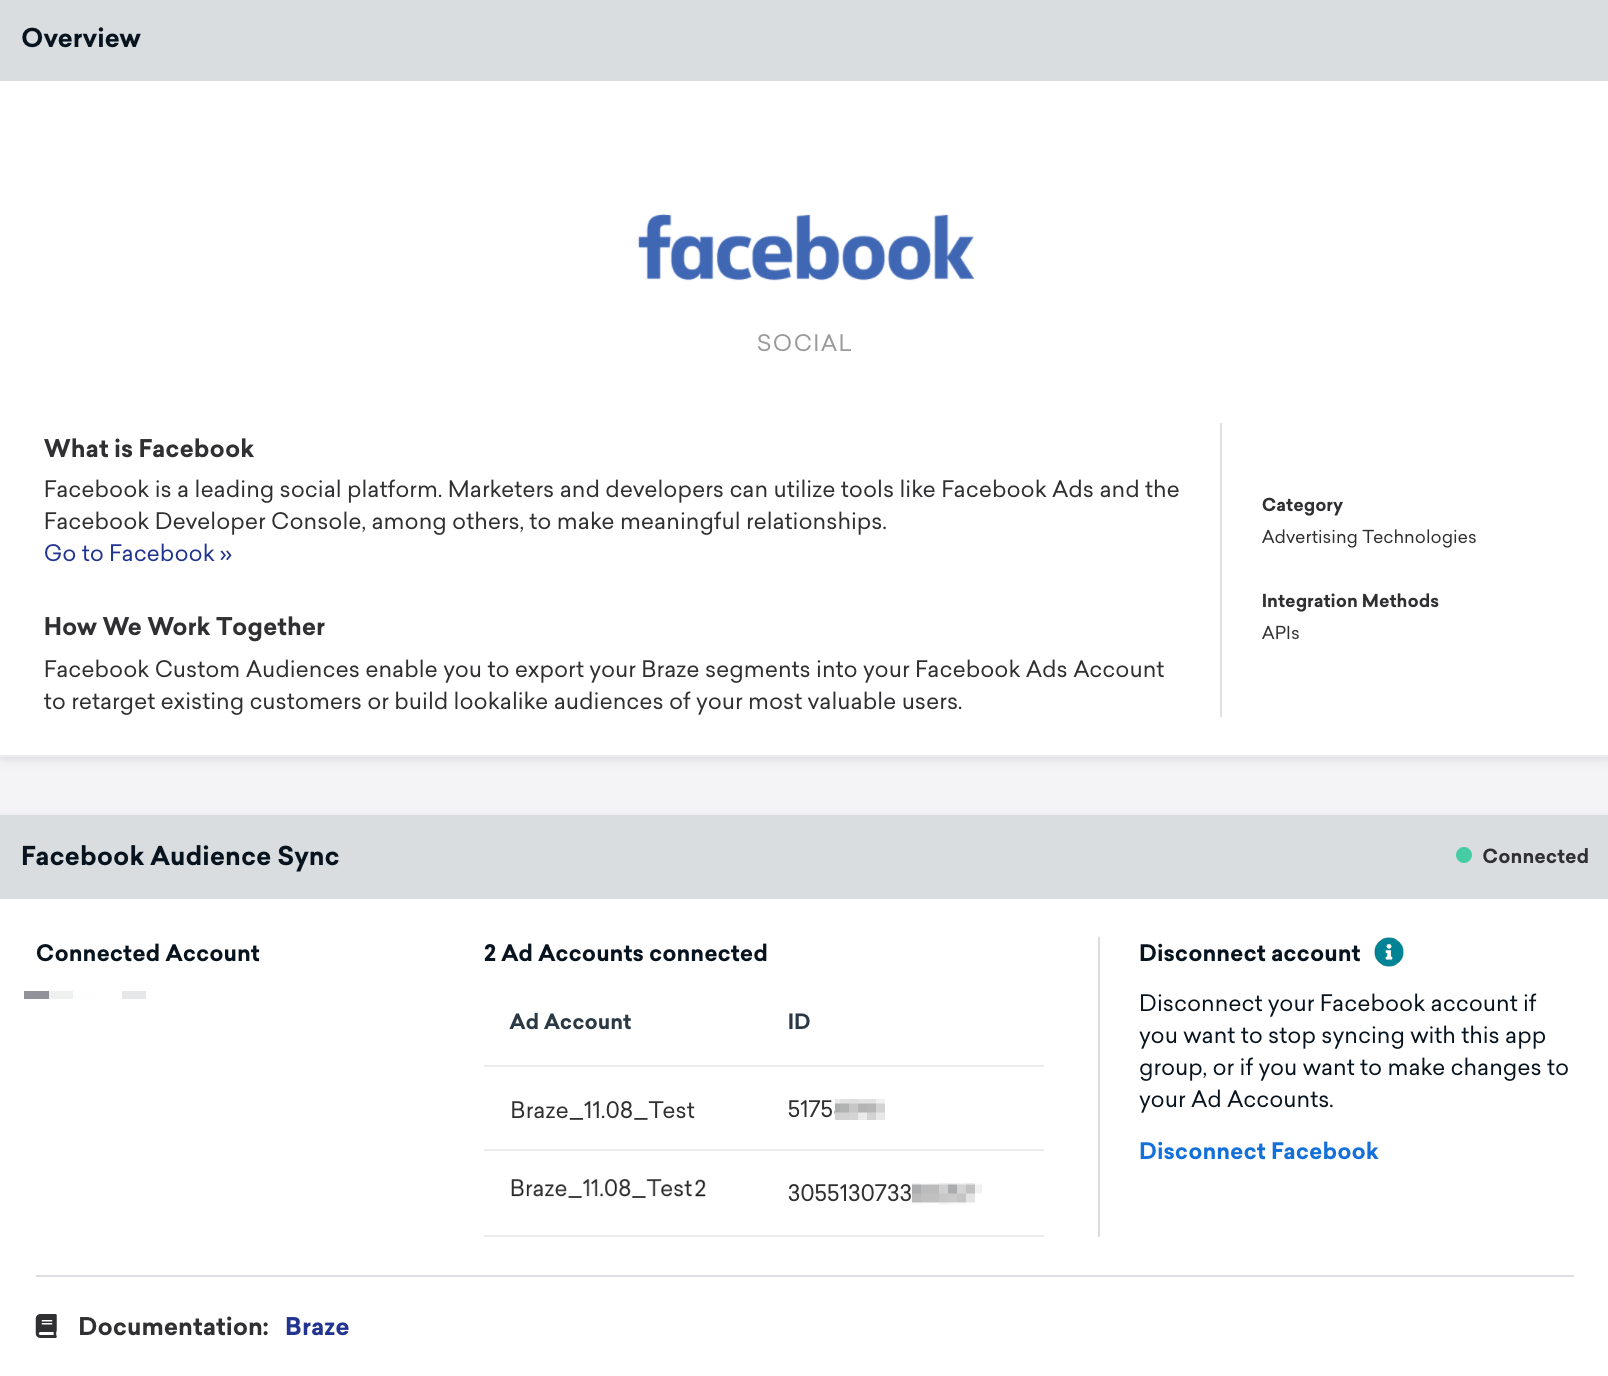 An updated version of the Facebook technology partners page showing the ad accounts successfully connected.